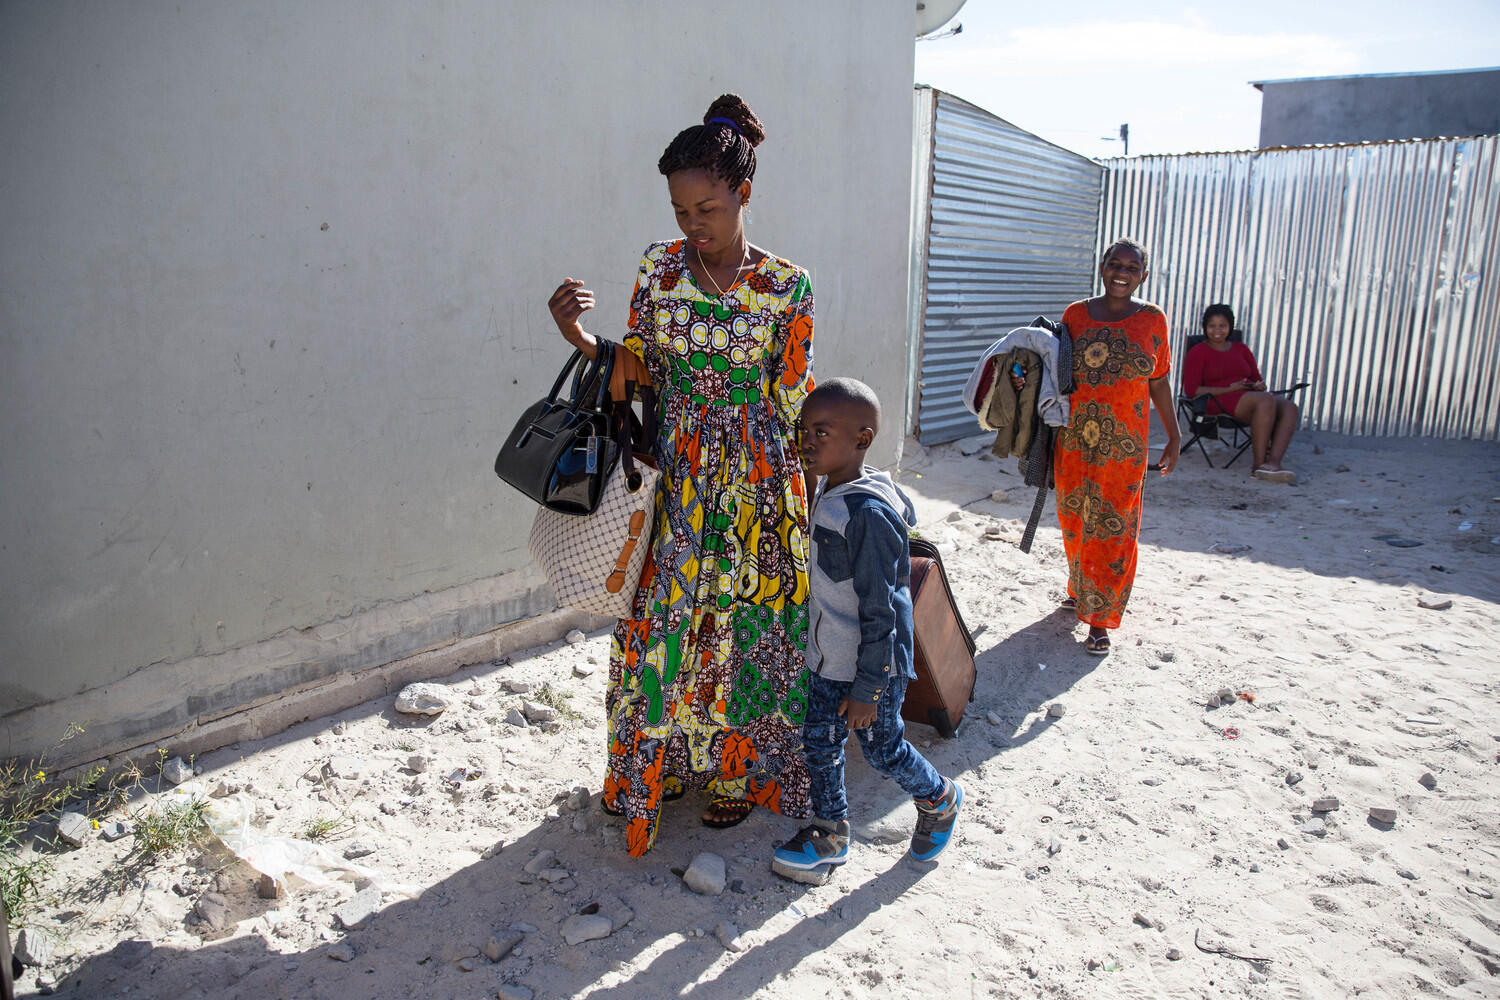 South Africa. Congolese refugees resettled to France